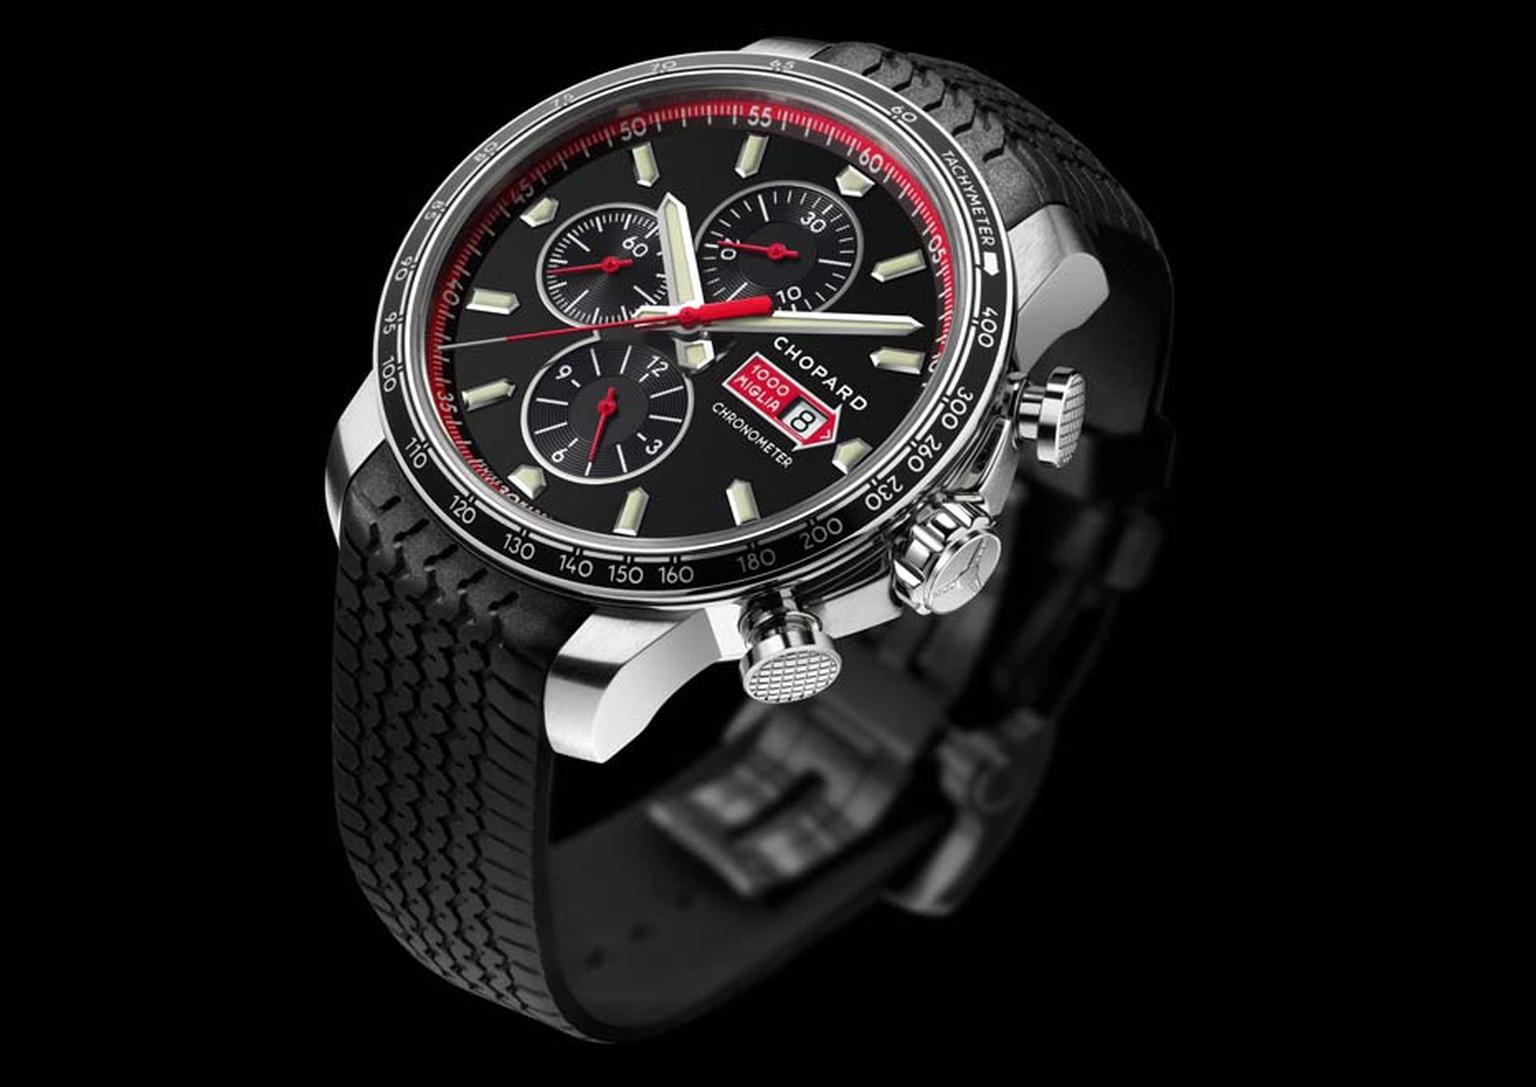 The Chopard Mille Miglia GTS Chronograph comes in a slightly larger 44mm case and has a tachymetre to measure speed on the aluminium bezel. The dial displays 30-minute and 12-hour chrono counters, a small seconds counter and a date window, all powered by 